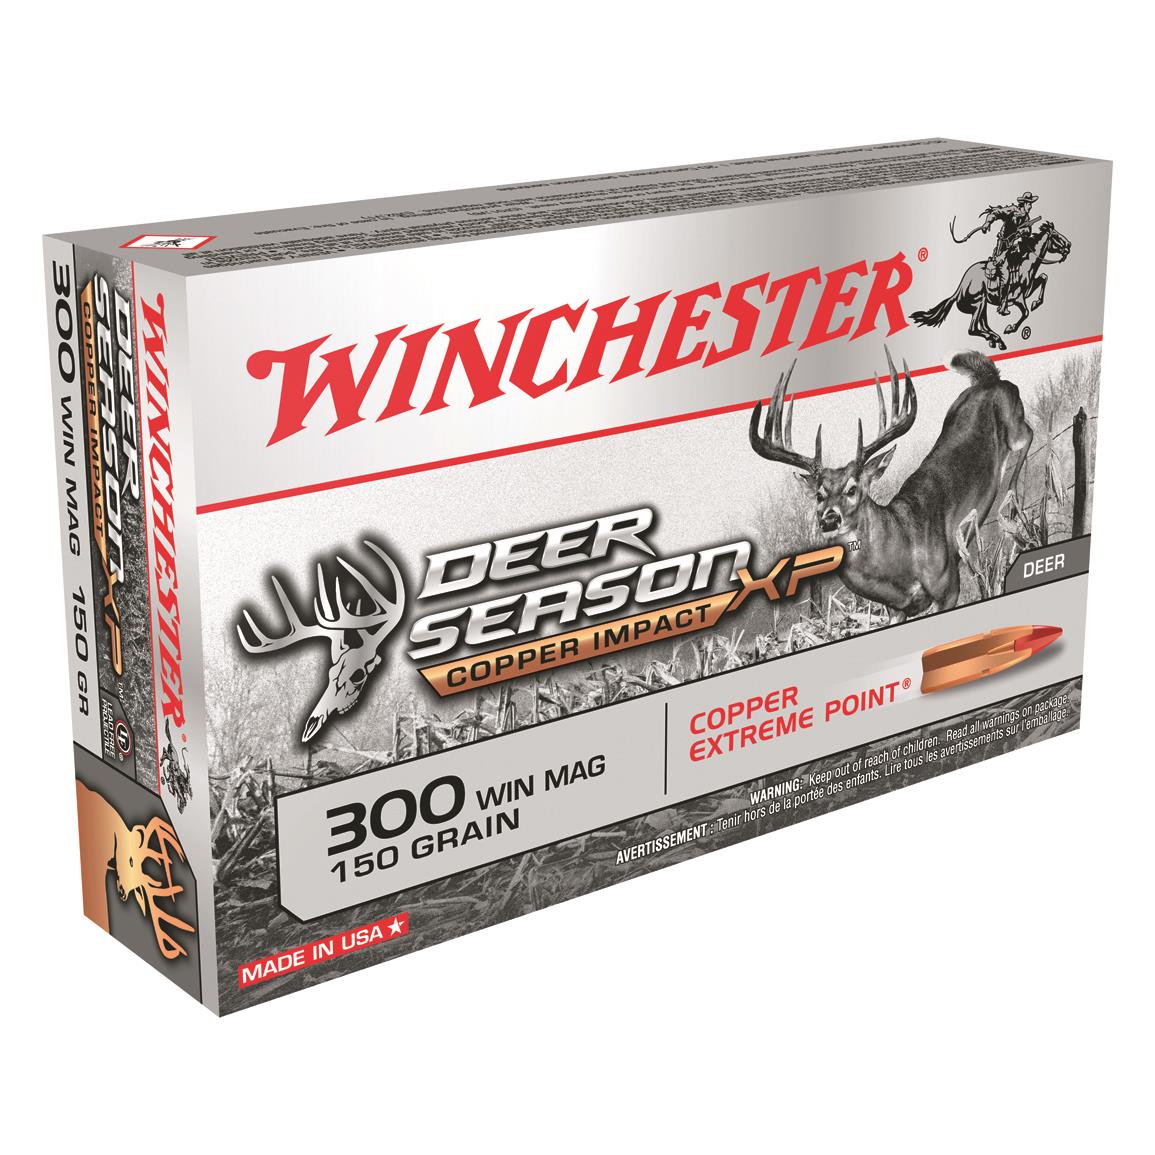 Winchester, Deer Season XP Copper Impact, .300 Win. Mag, Extreme Point Lead Free, 150 Gr., 20 Rounds